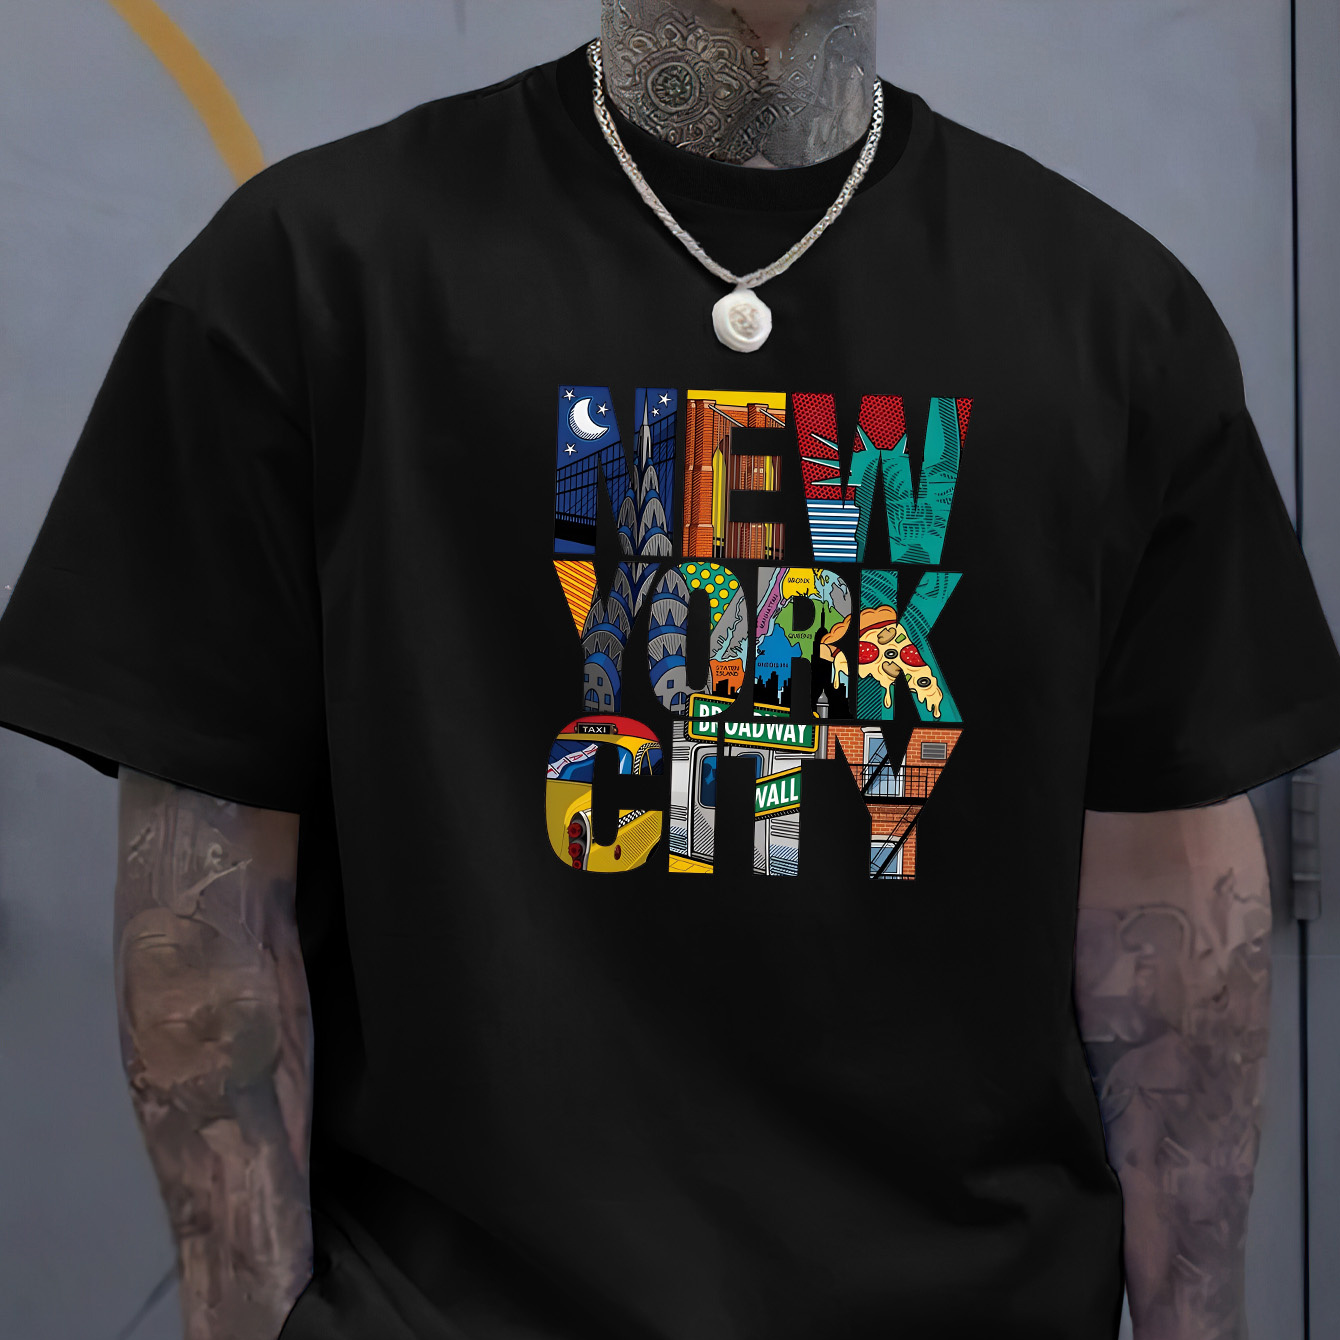 

New York City " Creative Print Stylish T-shirt For Men, Casual Summer Top, Comfortable And Fashion Crew Neck Short Sleeve, Suitable For Daily Wear